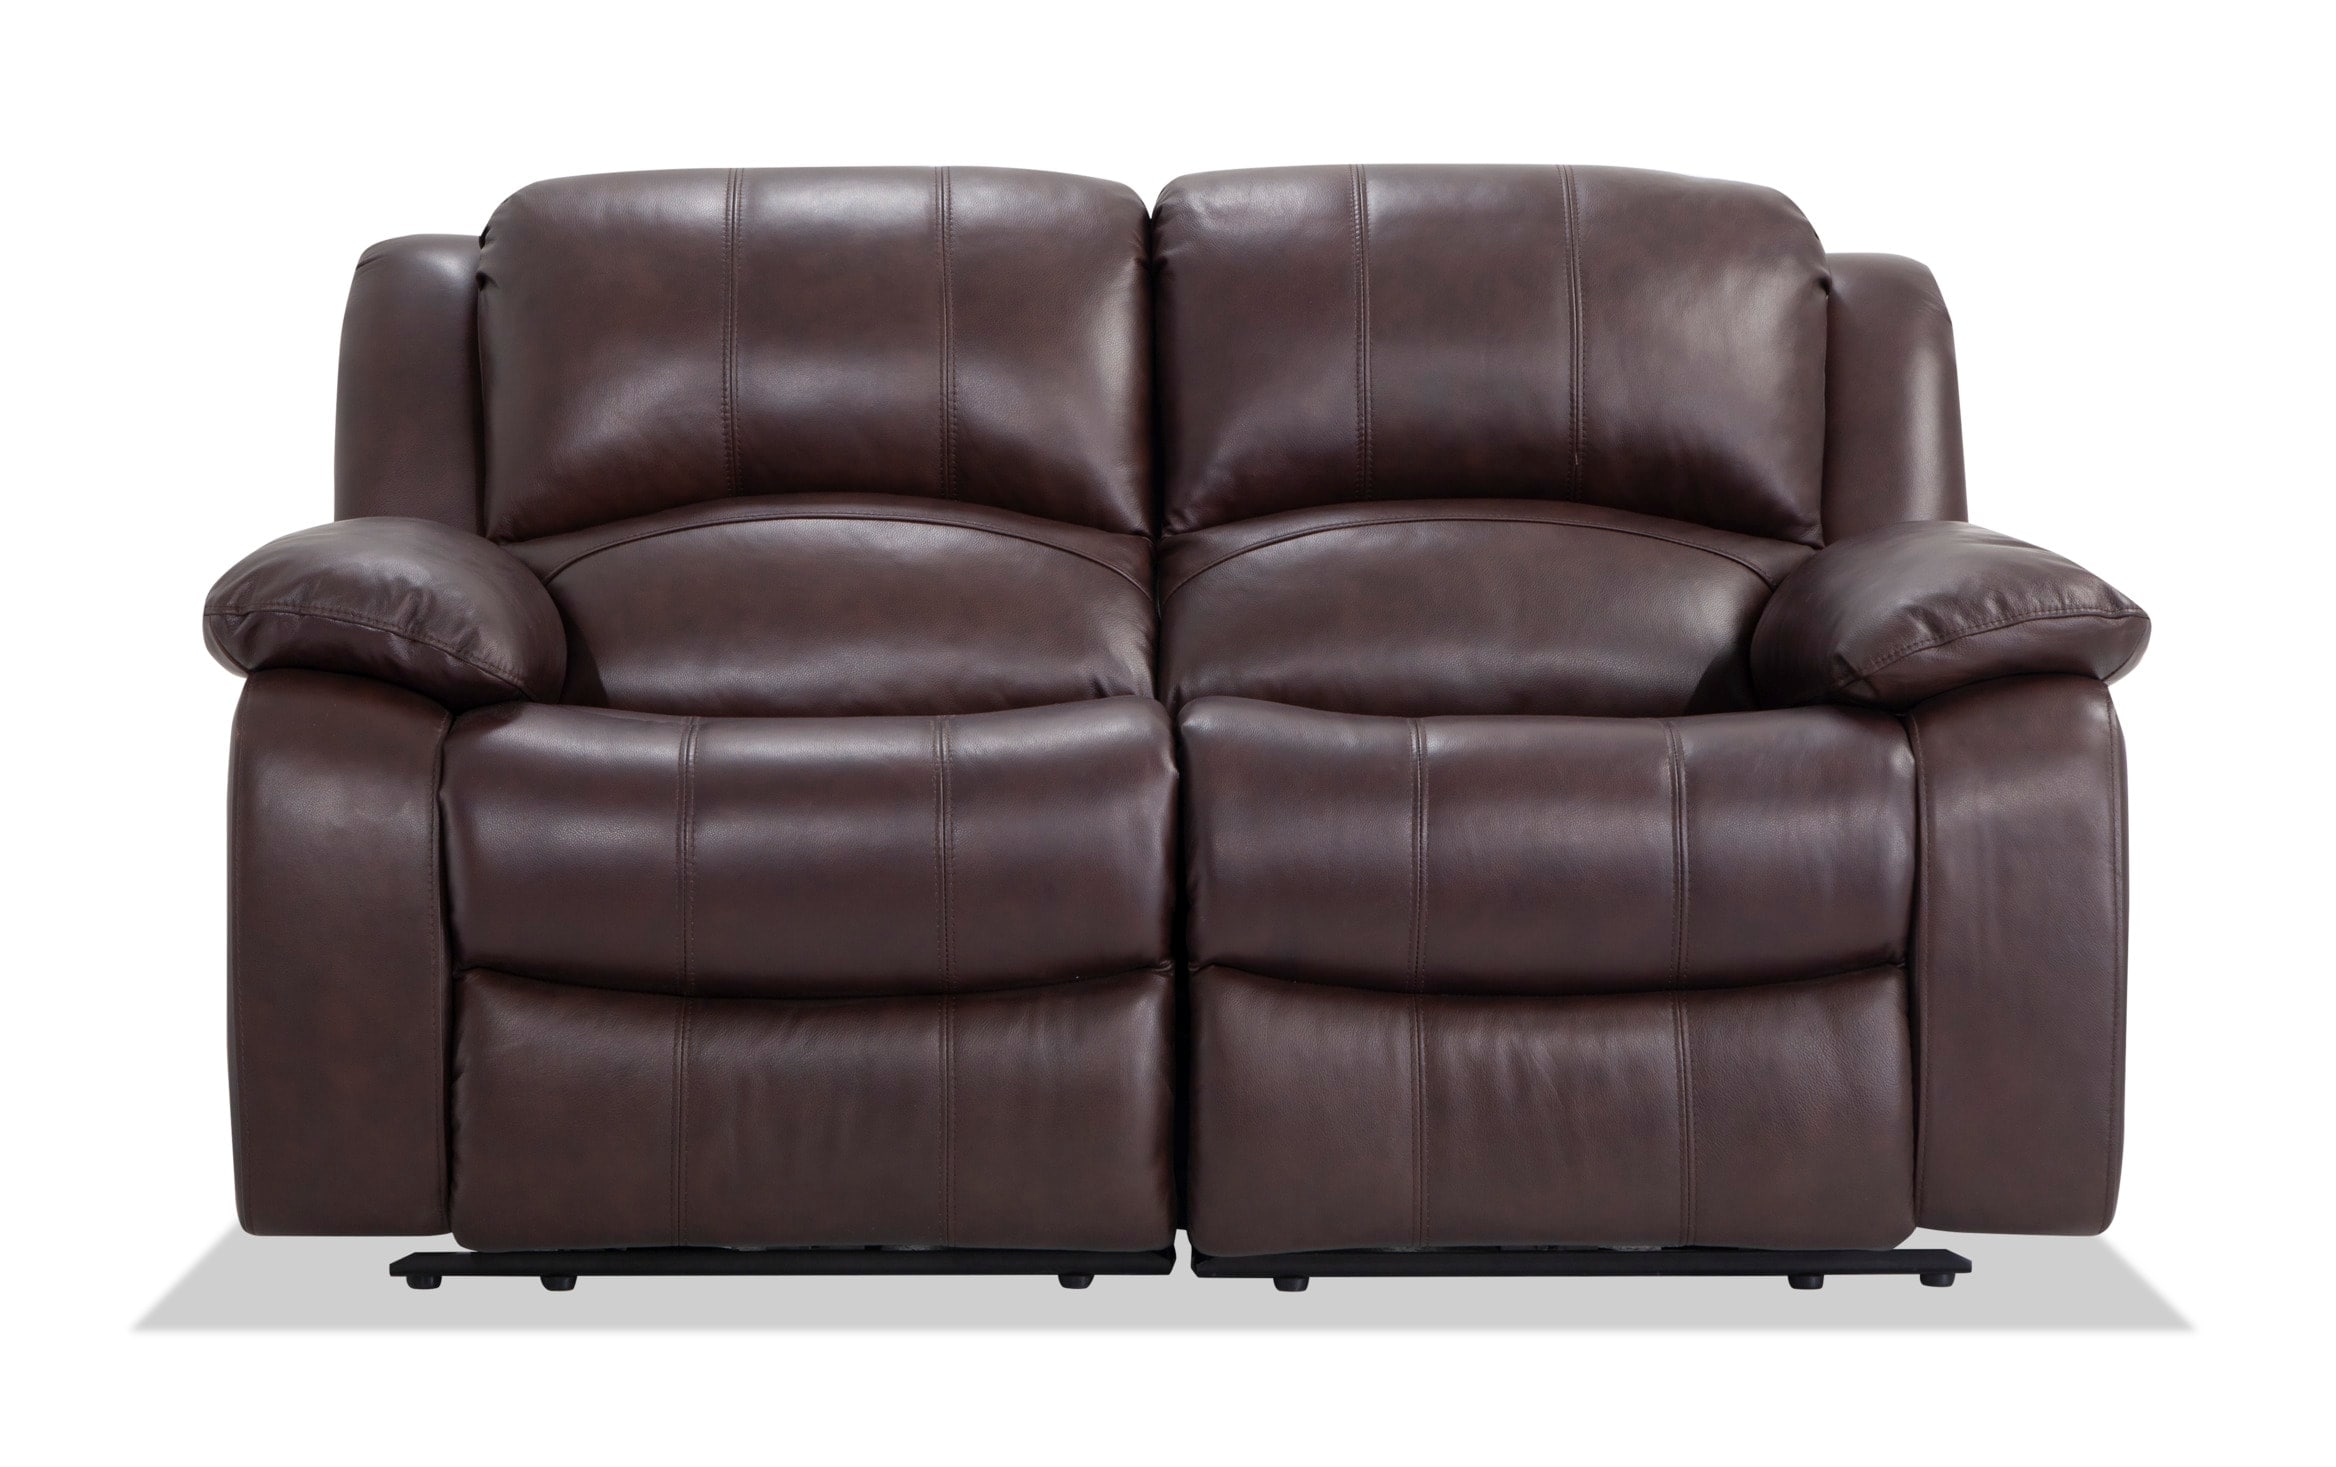 Olympus Brown Leather Power Reclining, Brown Leather Love Seat